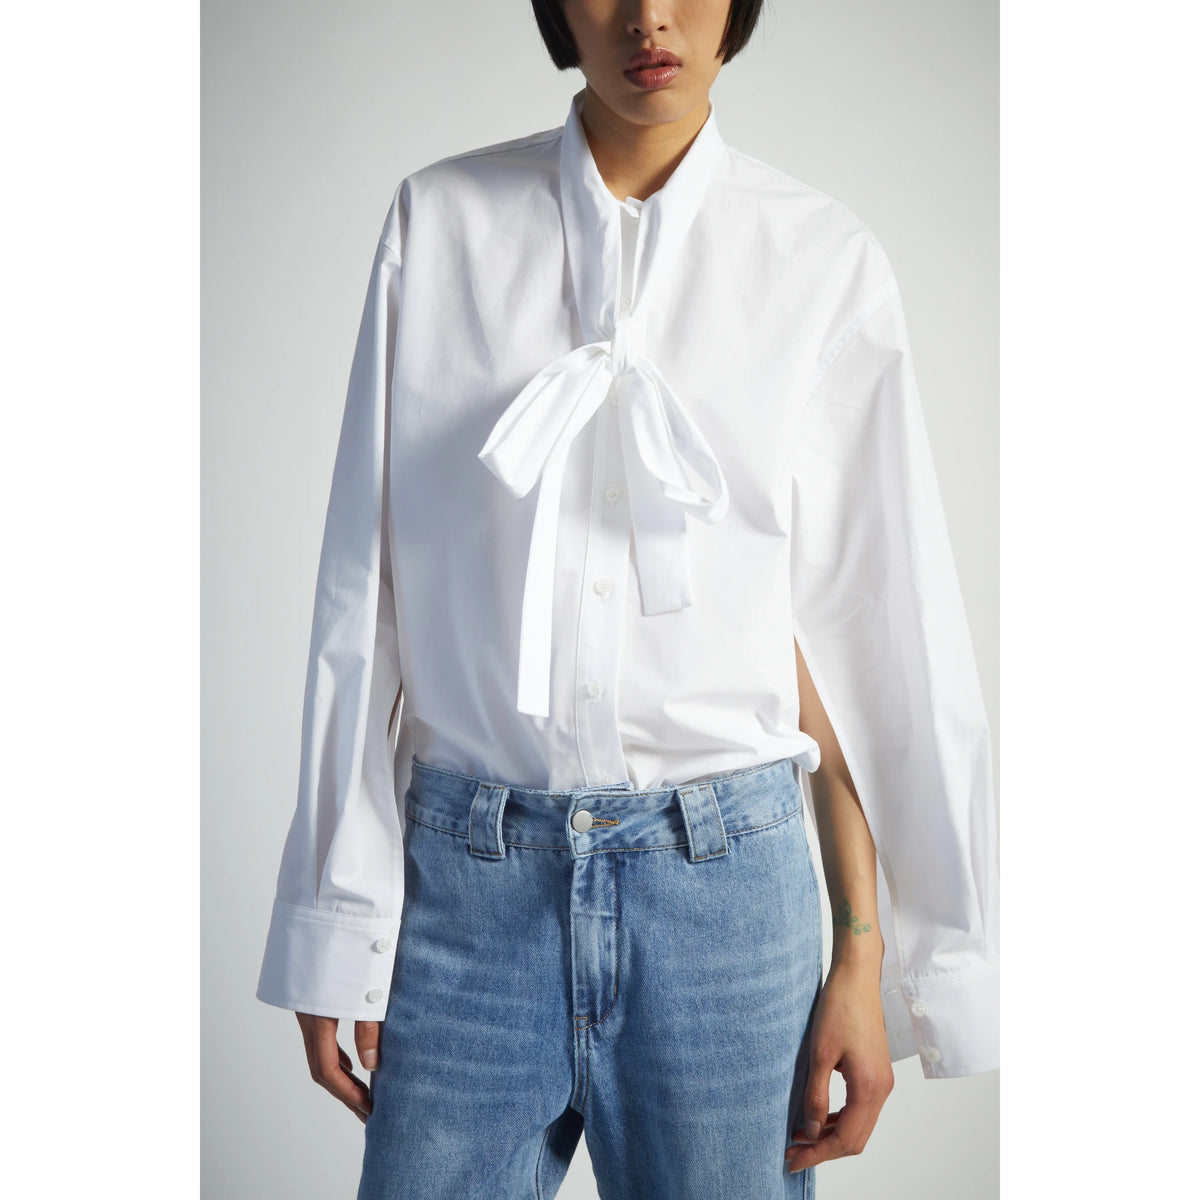 Kimberly Bow-Tie Blouse